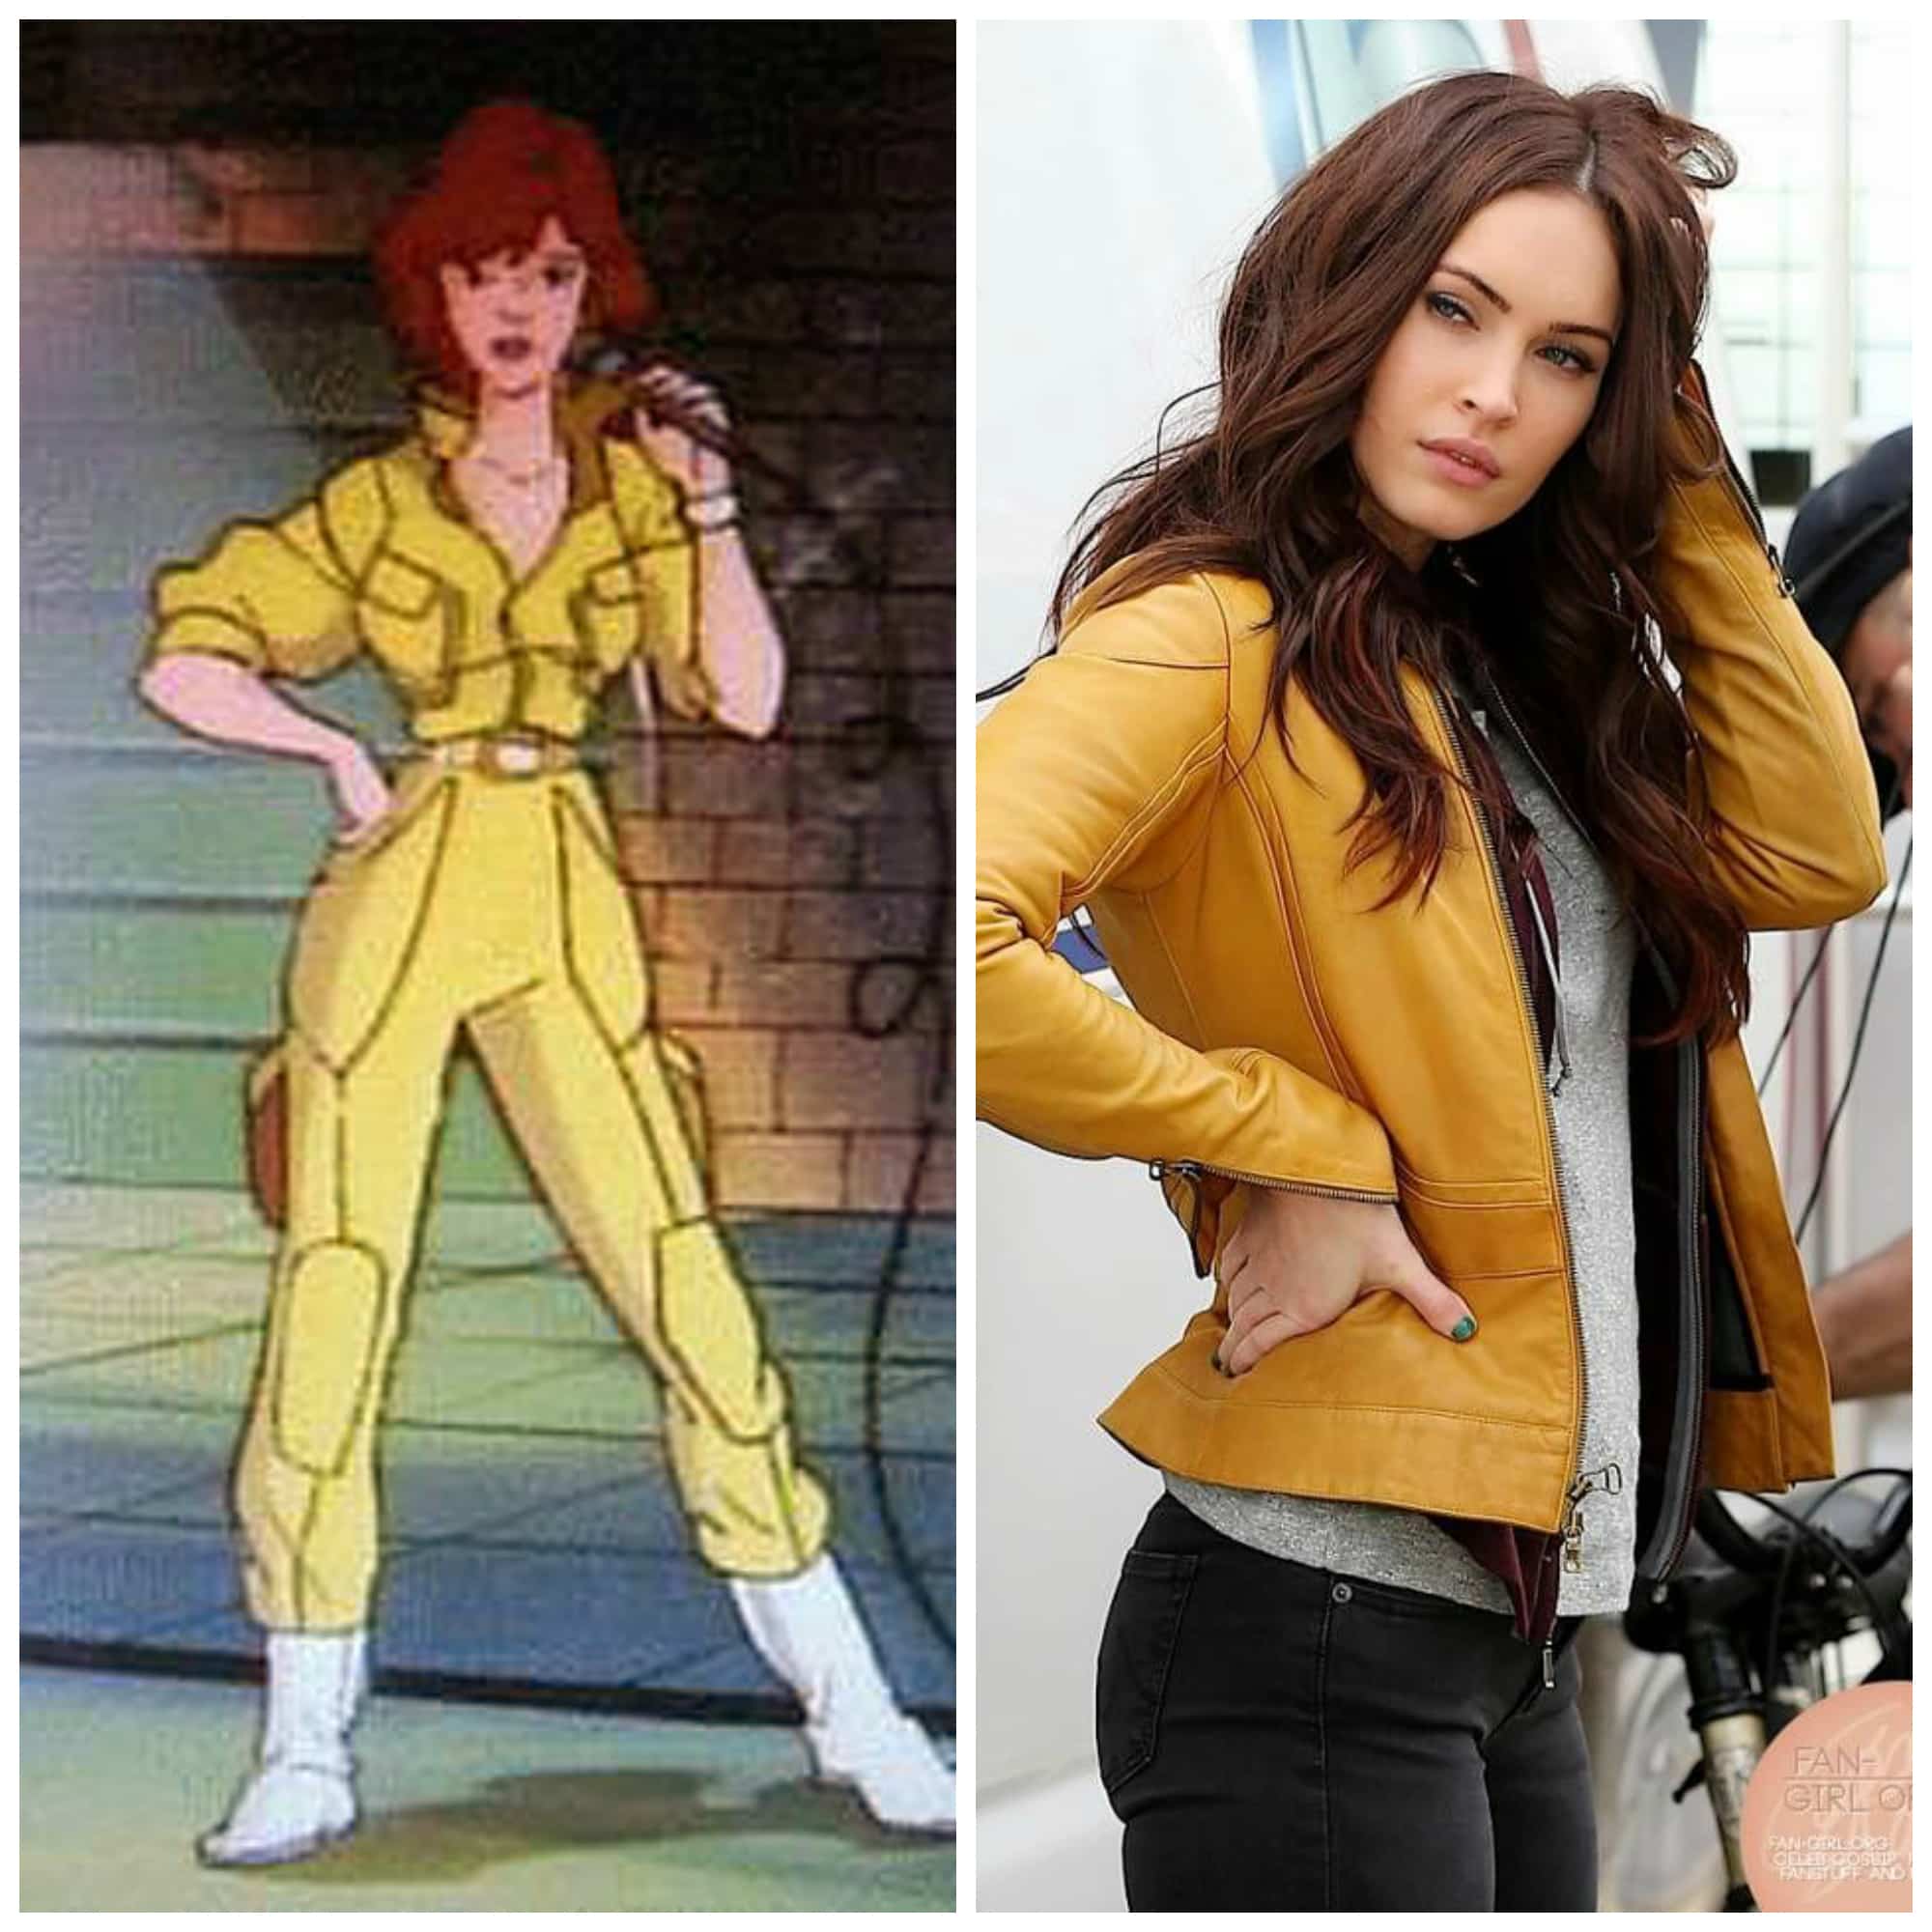 April Oneil played by Megan Fox